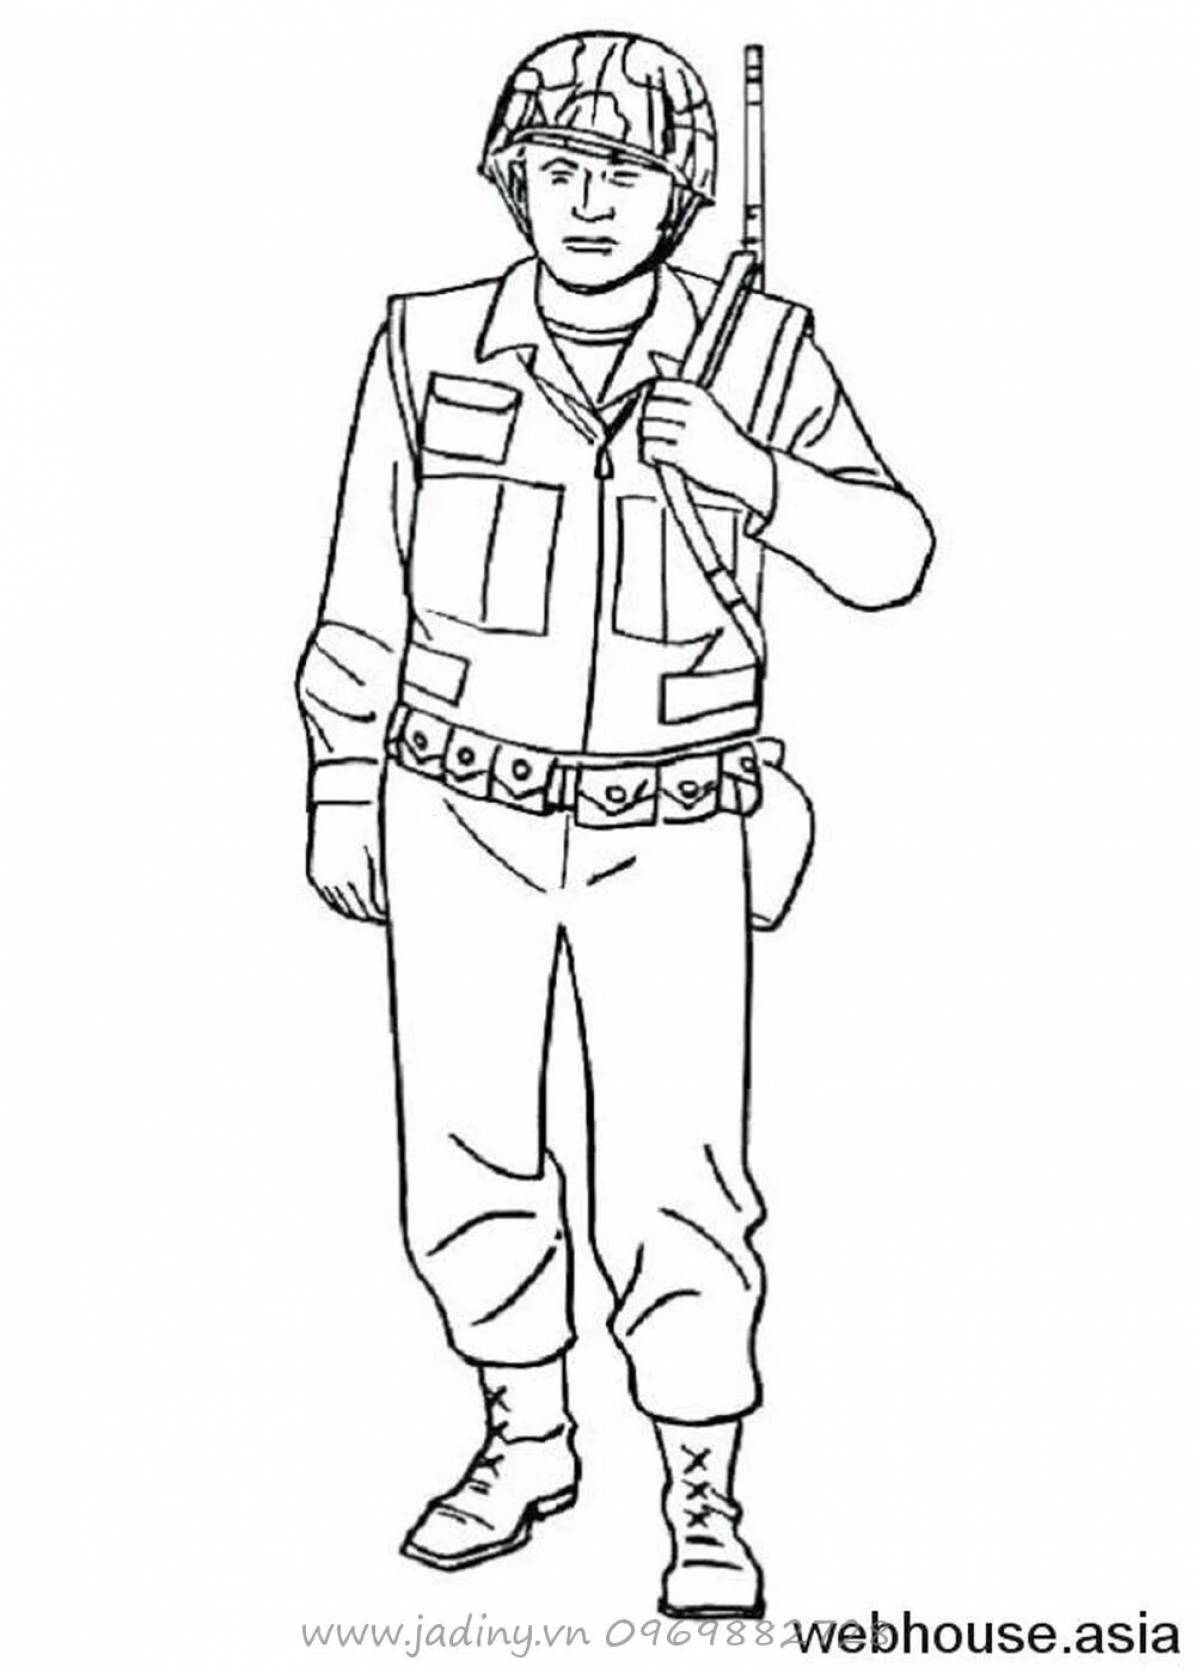 Soldier drawing for kids #3